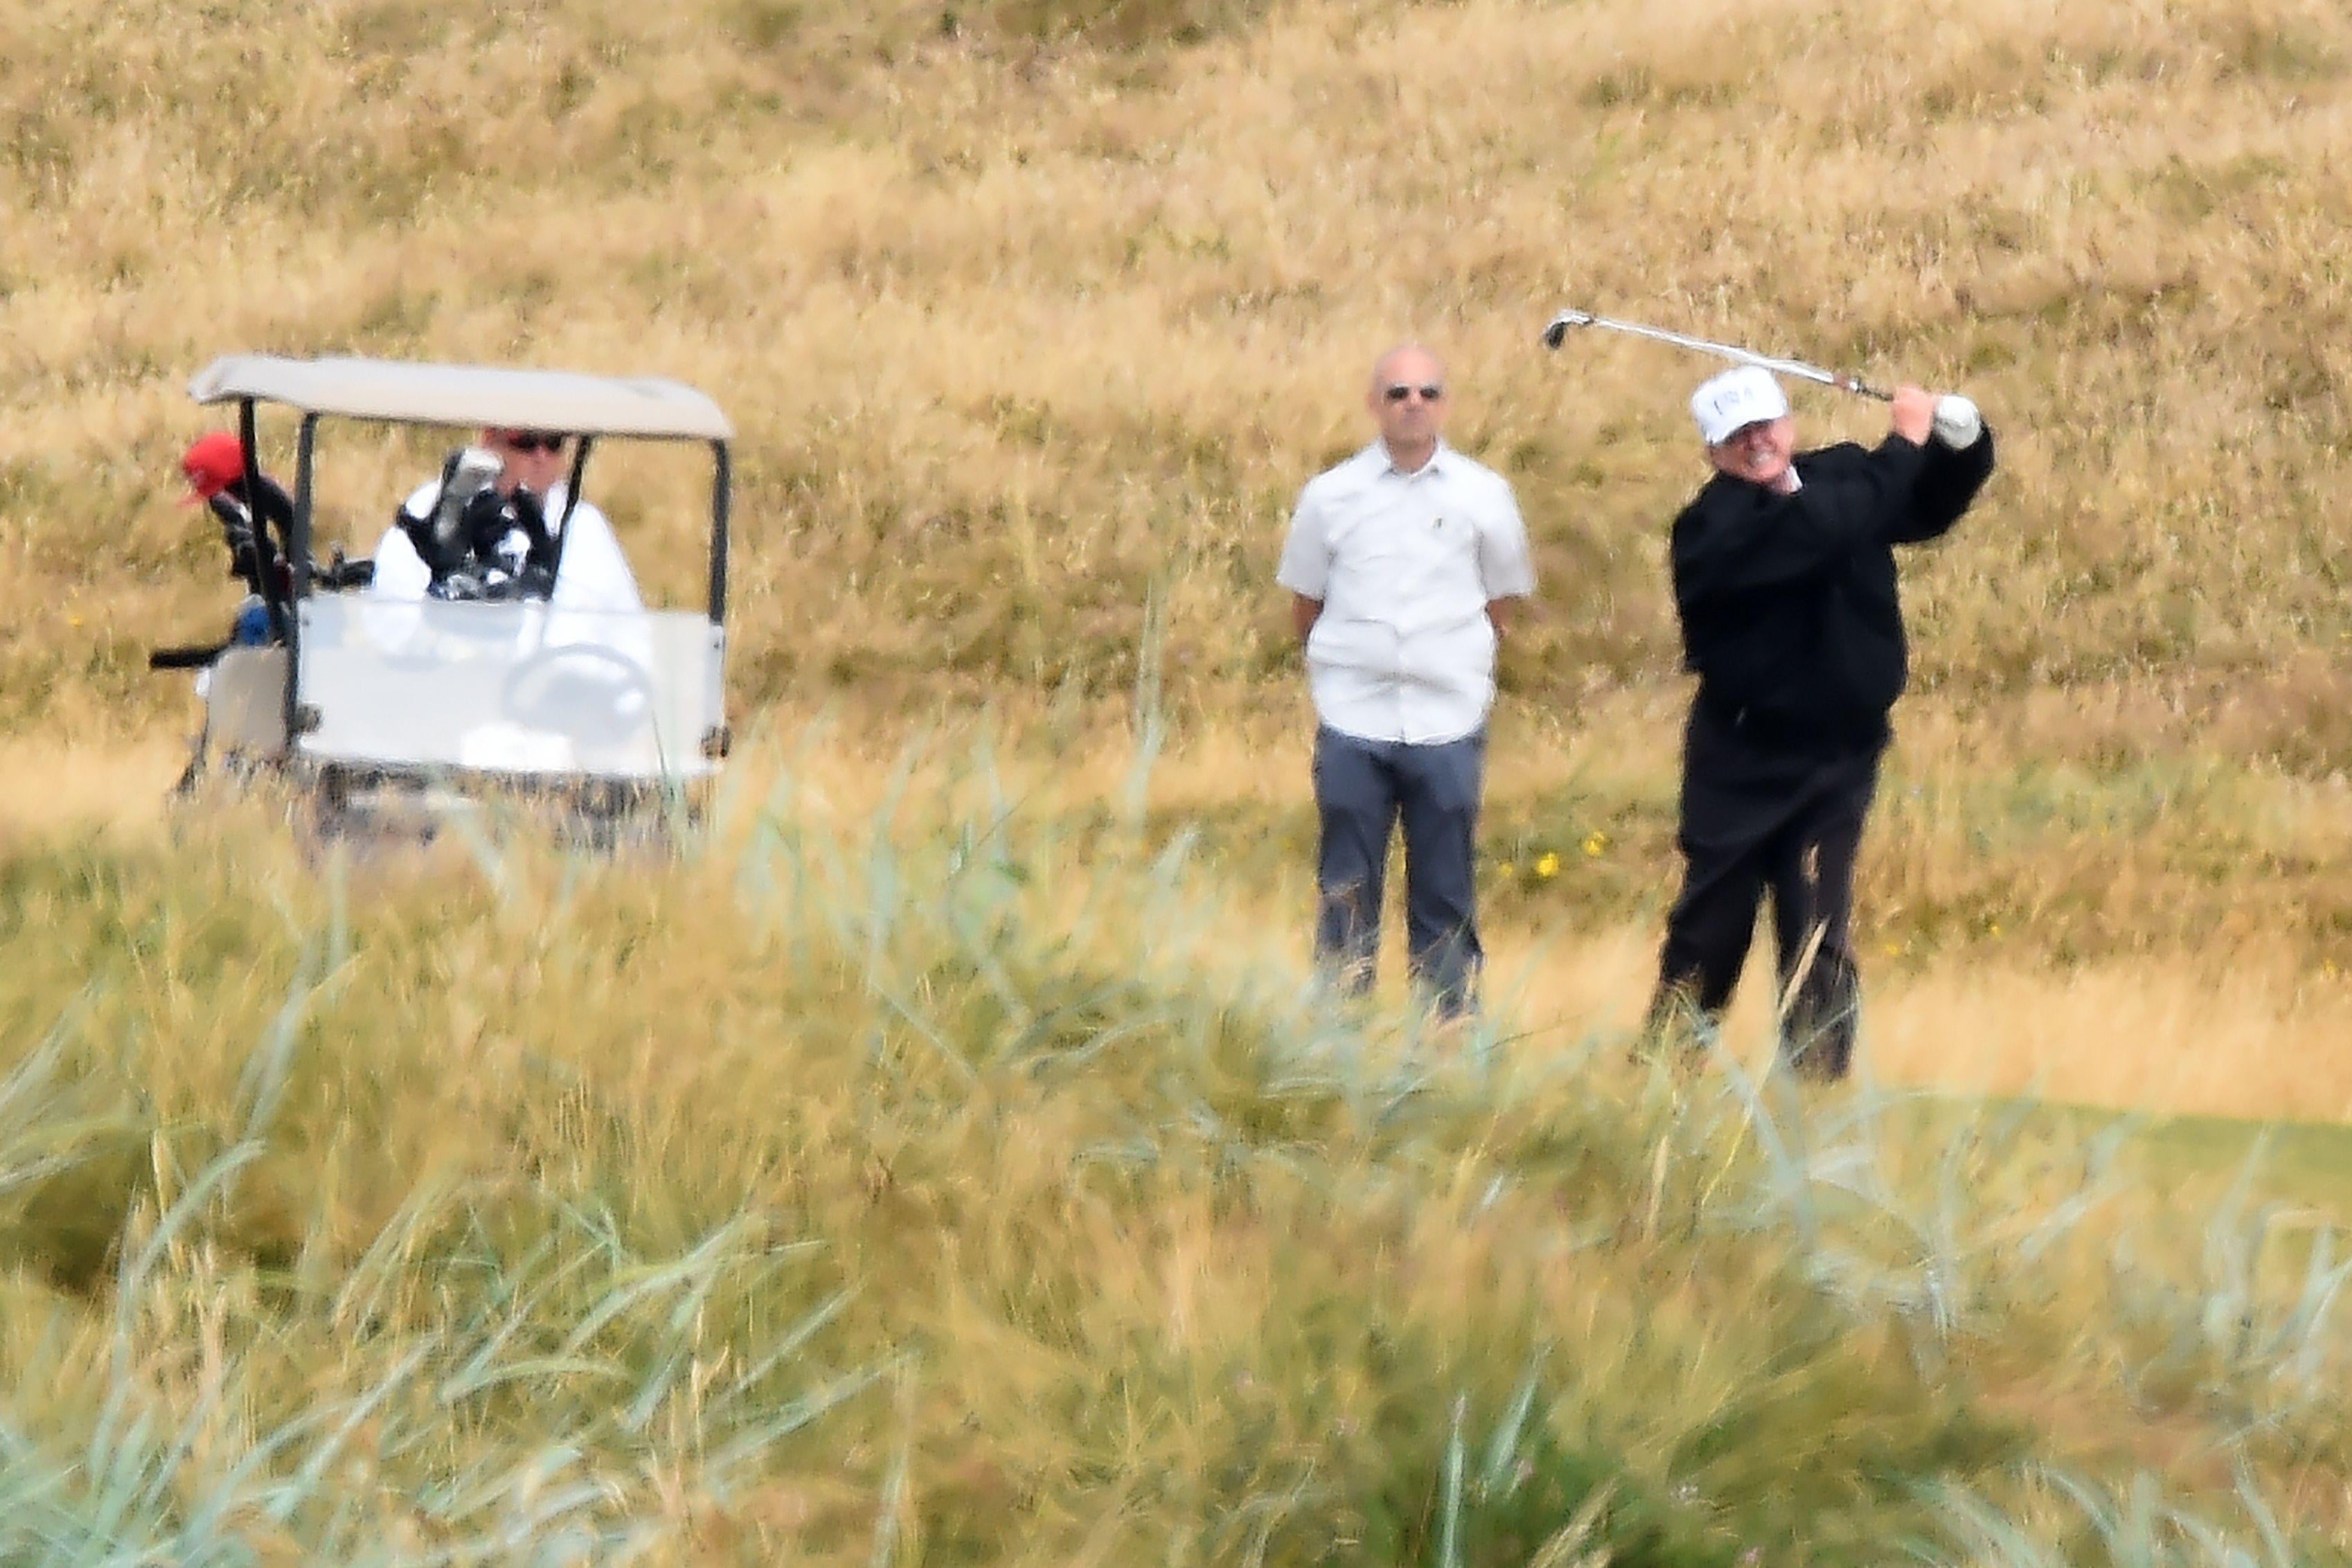 President Donald Trump plays a round of golf at Trump Turnberry on July 14, 2018.